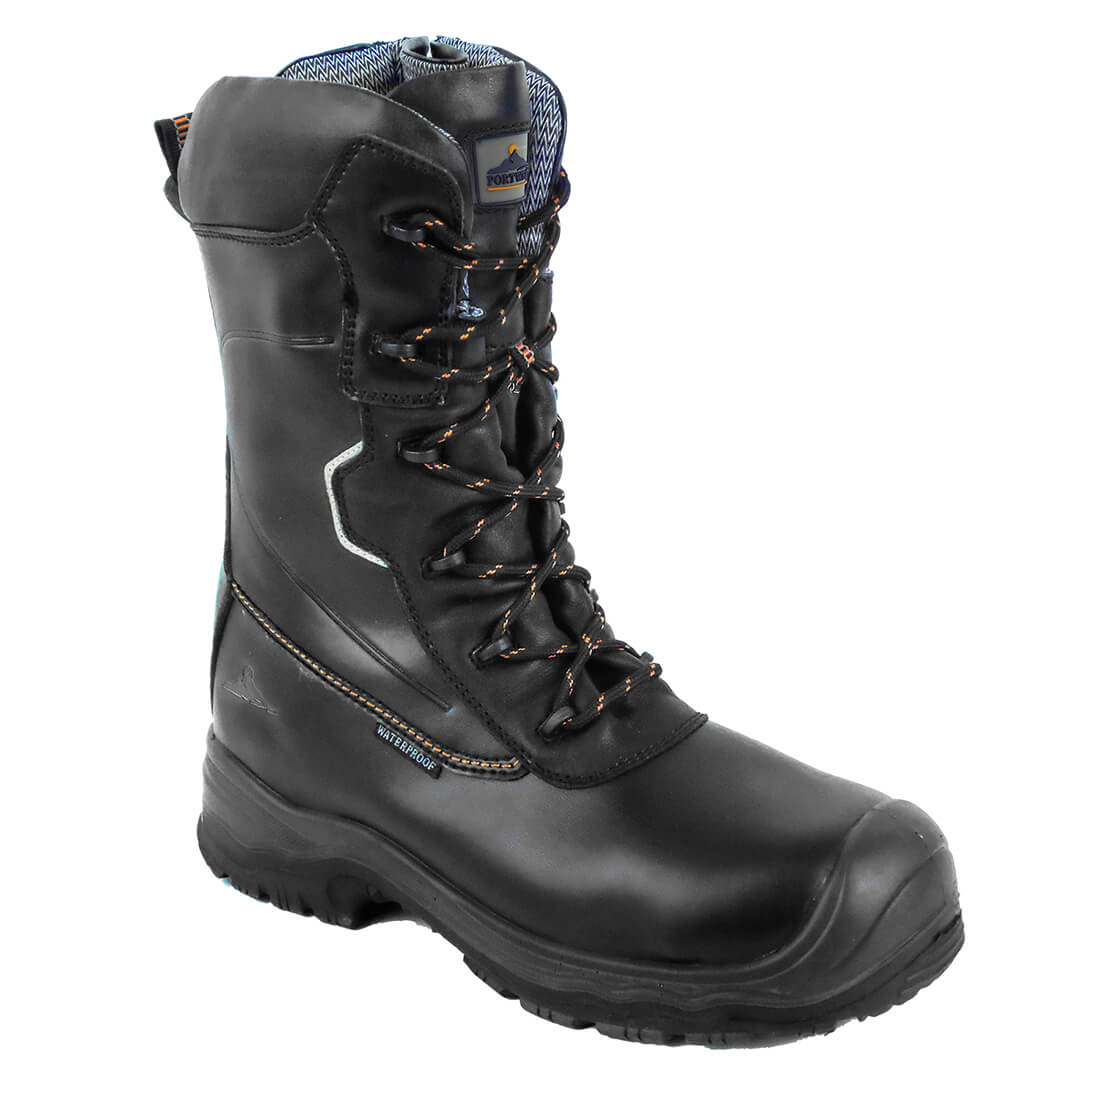 Image of Portwest Mens Compositelite Traction Safety Boots Black Size 6